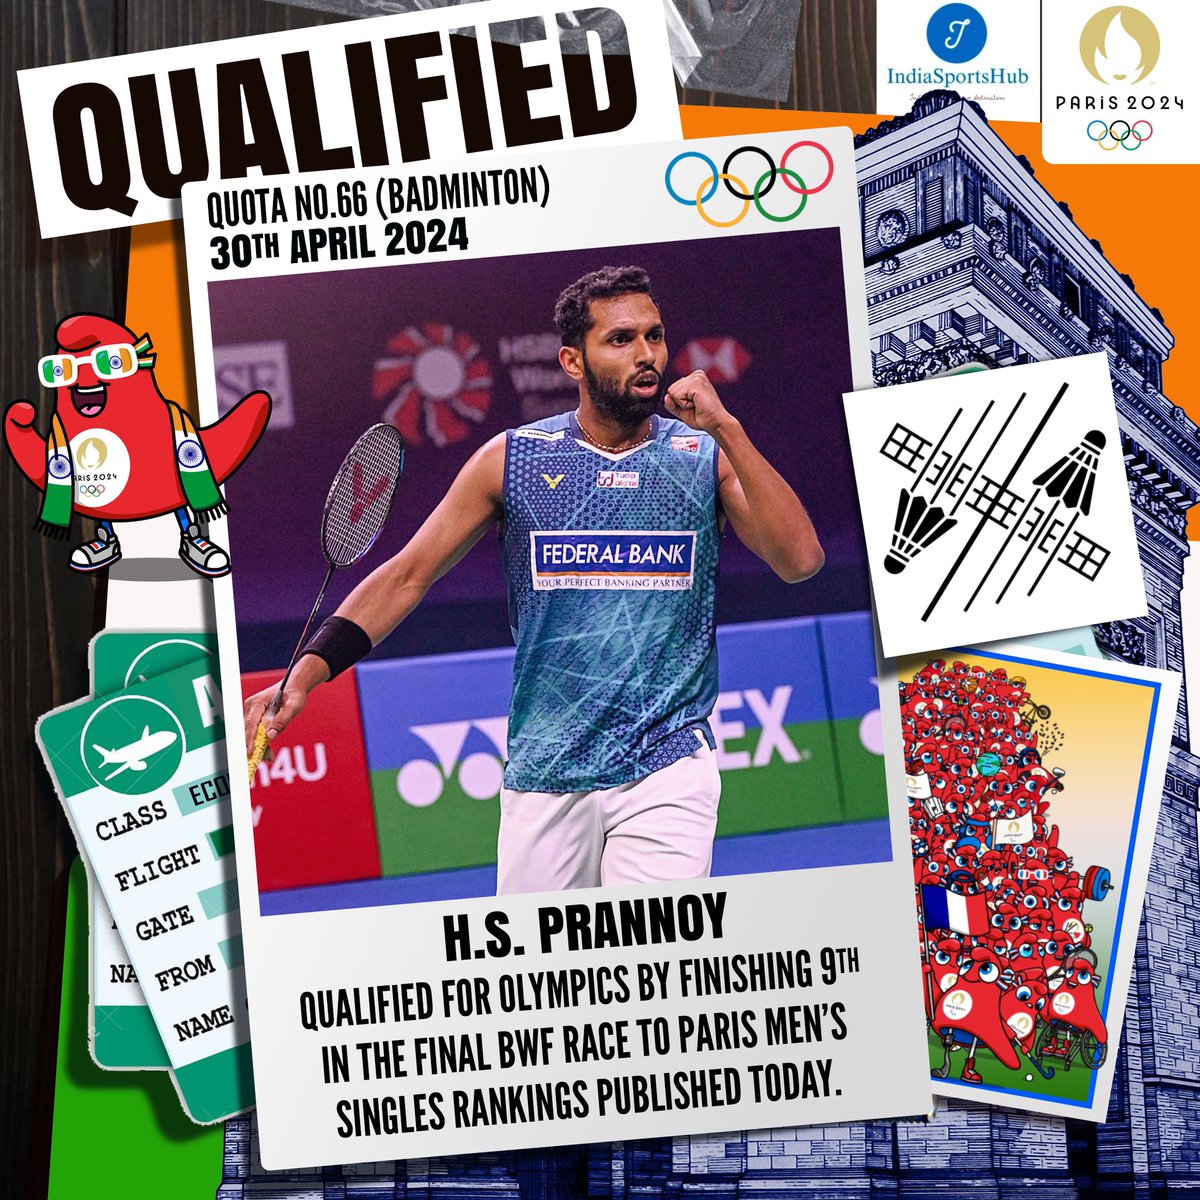 INDIA WILL HAVE TWO IN MEN SINGLES AT PARIS 2024 Yes, now its official 🚨 The flamboyant @PRANNOYHSPRI and talented @lakshya_sen will represent India at the #Paris2024 This is fantastic!!